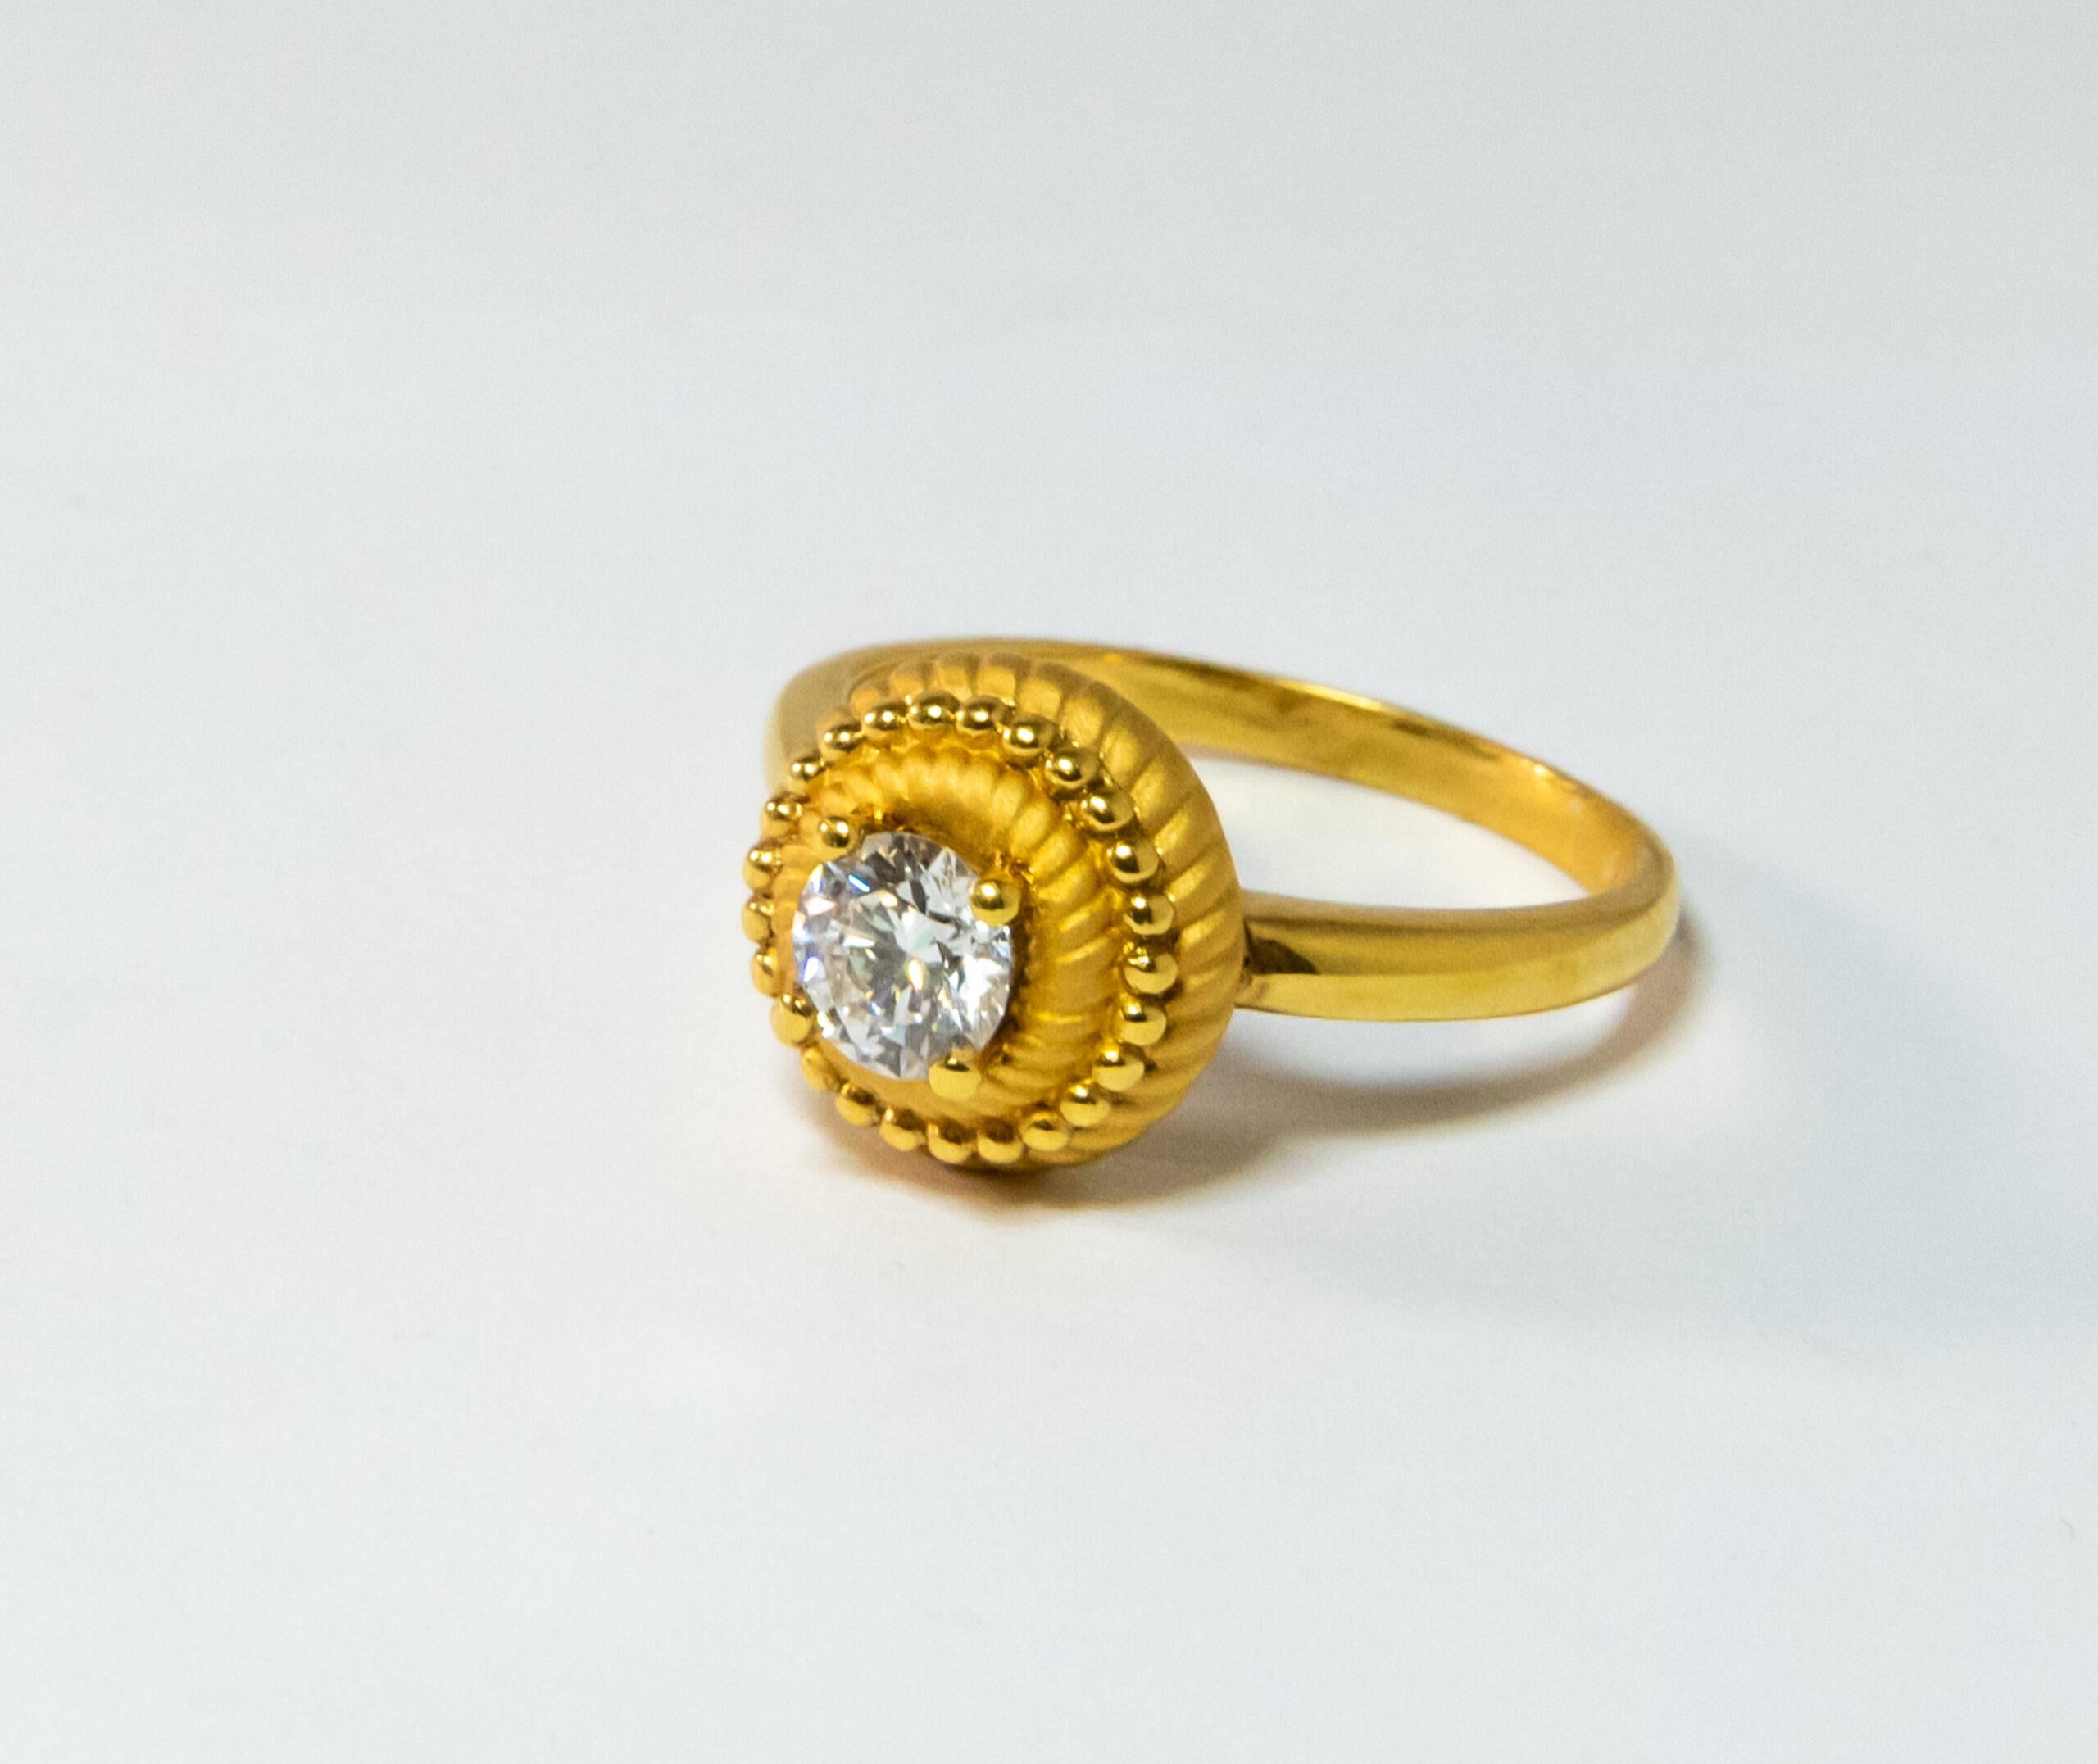 This ring is made of 18K Yellow Gold. It is decorated with a round-cut diamond (~0.50ct).

Size – 54 (6.75 US)